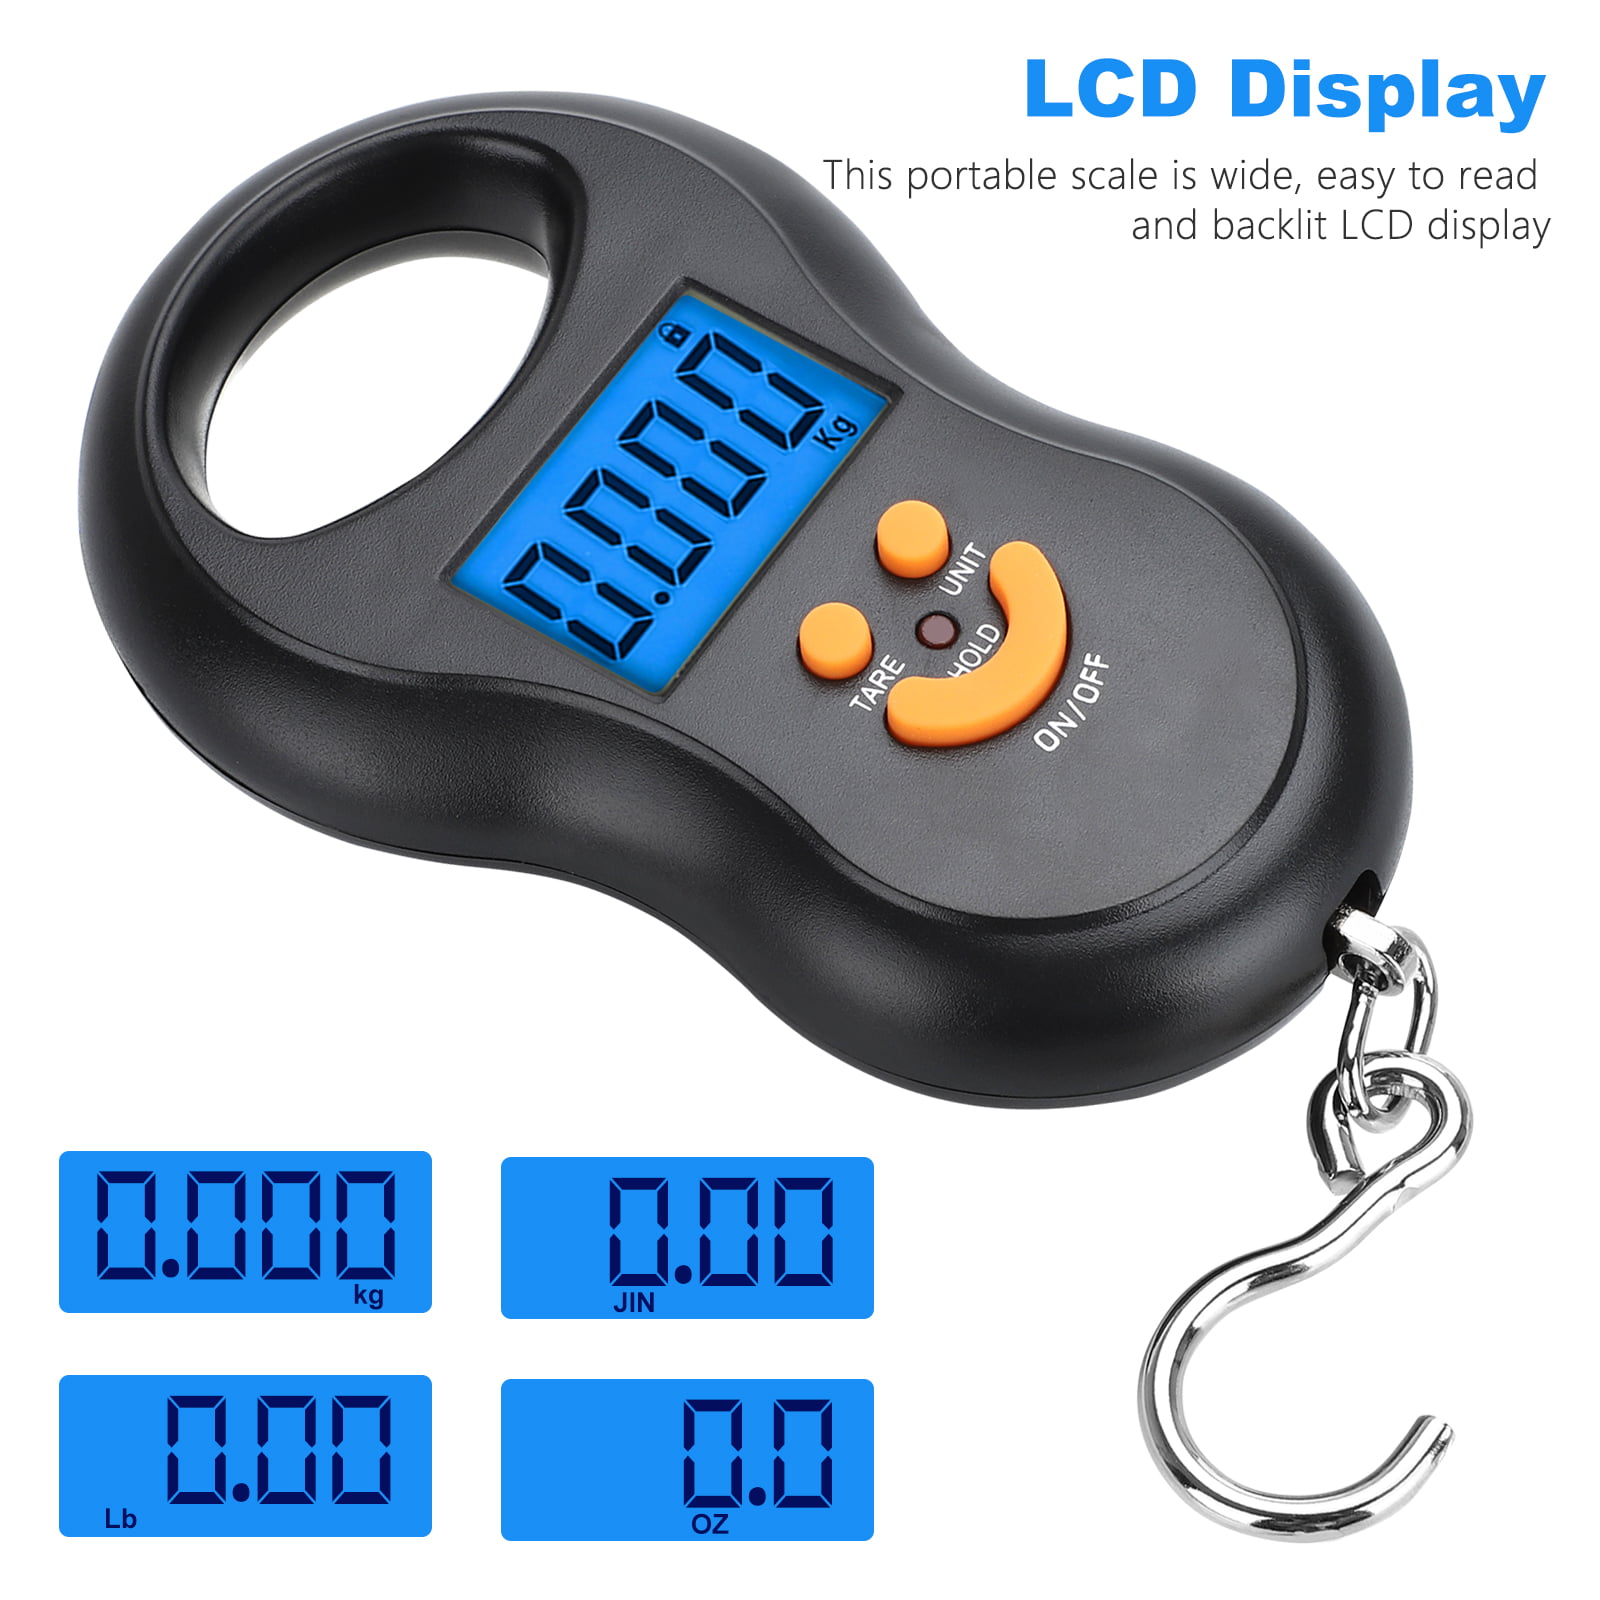 Details about   Luggage Postal Hanging Hook Weight Digital LCD Hand Scale Travels Luggage Fish 